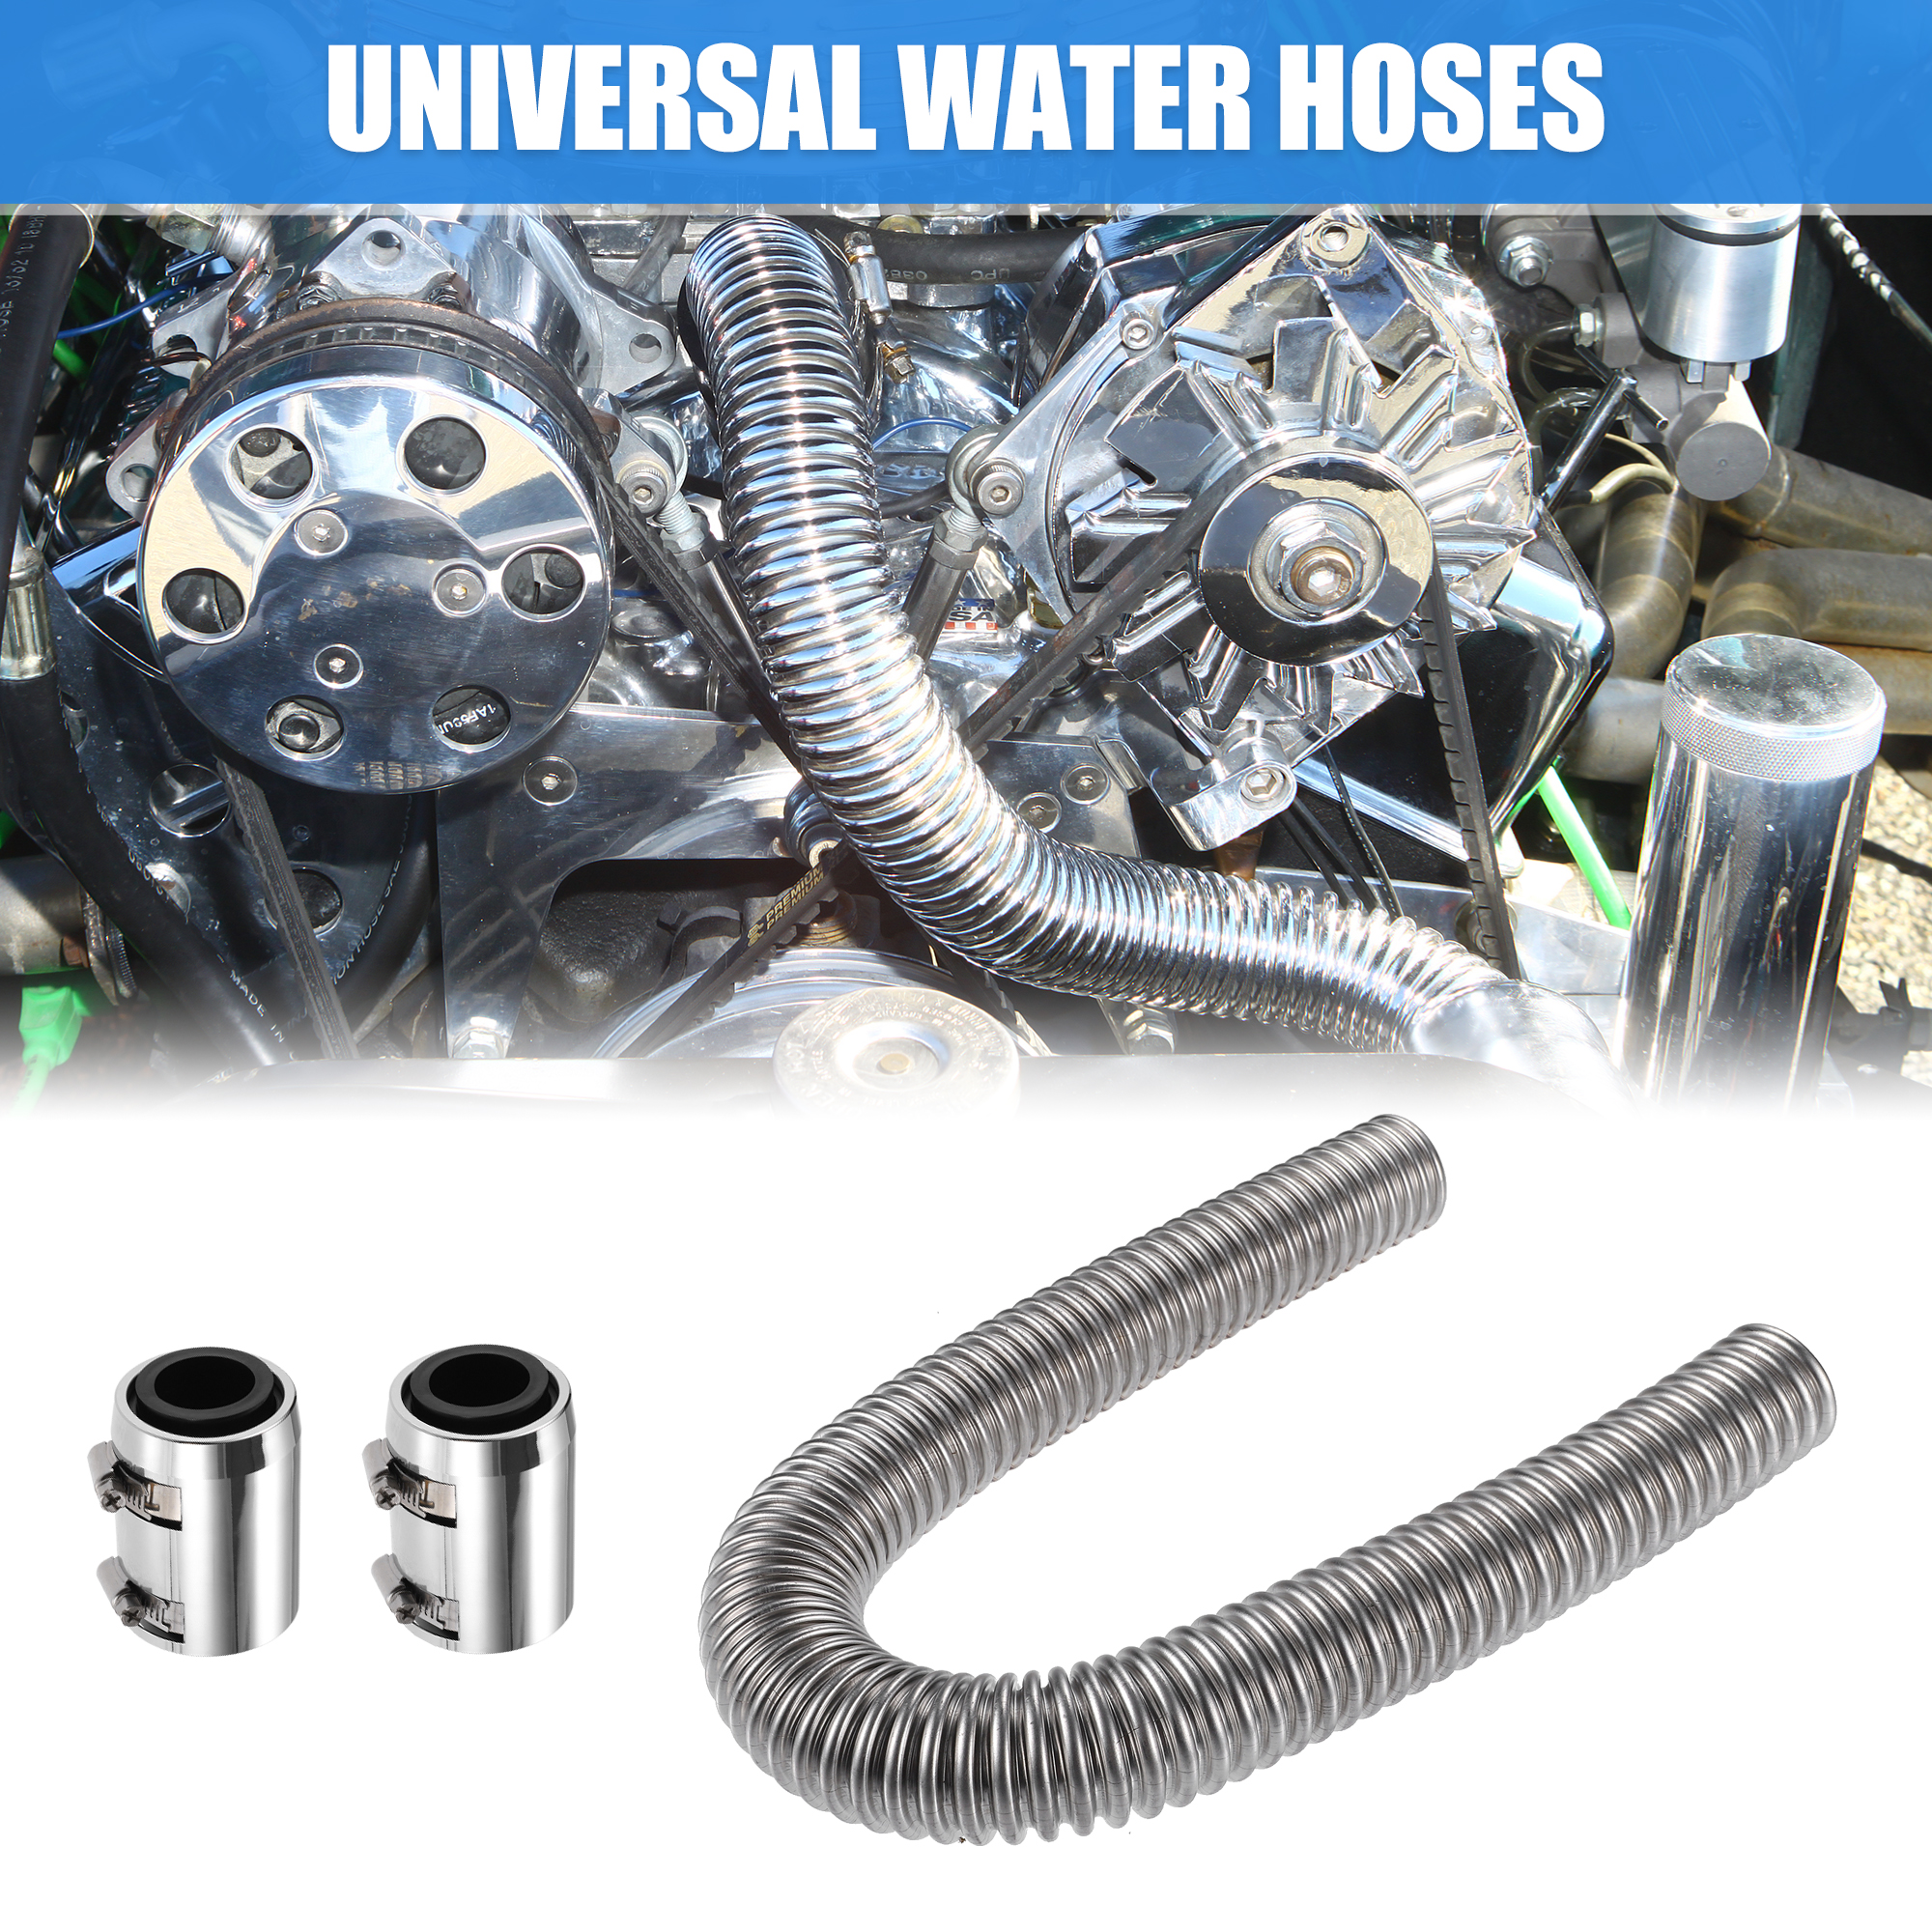 Unique Bargains 1Set 24 inch Flexible Radiator Hose Kit with 2 Clamps Replacement Silver Tone